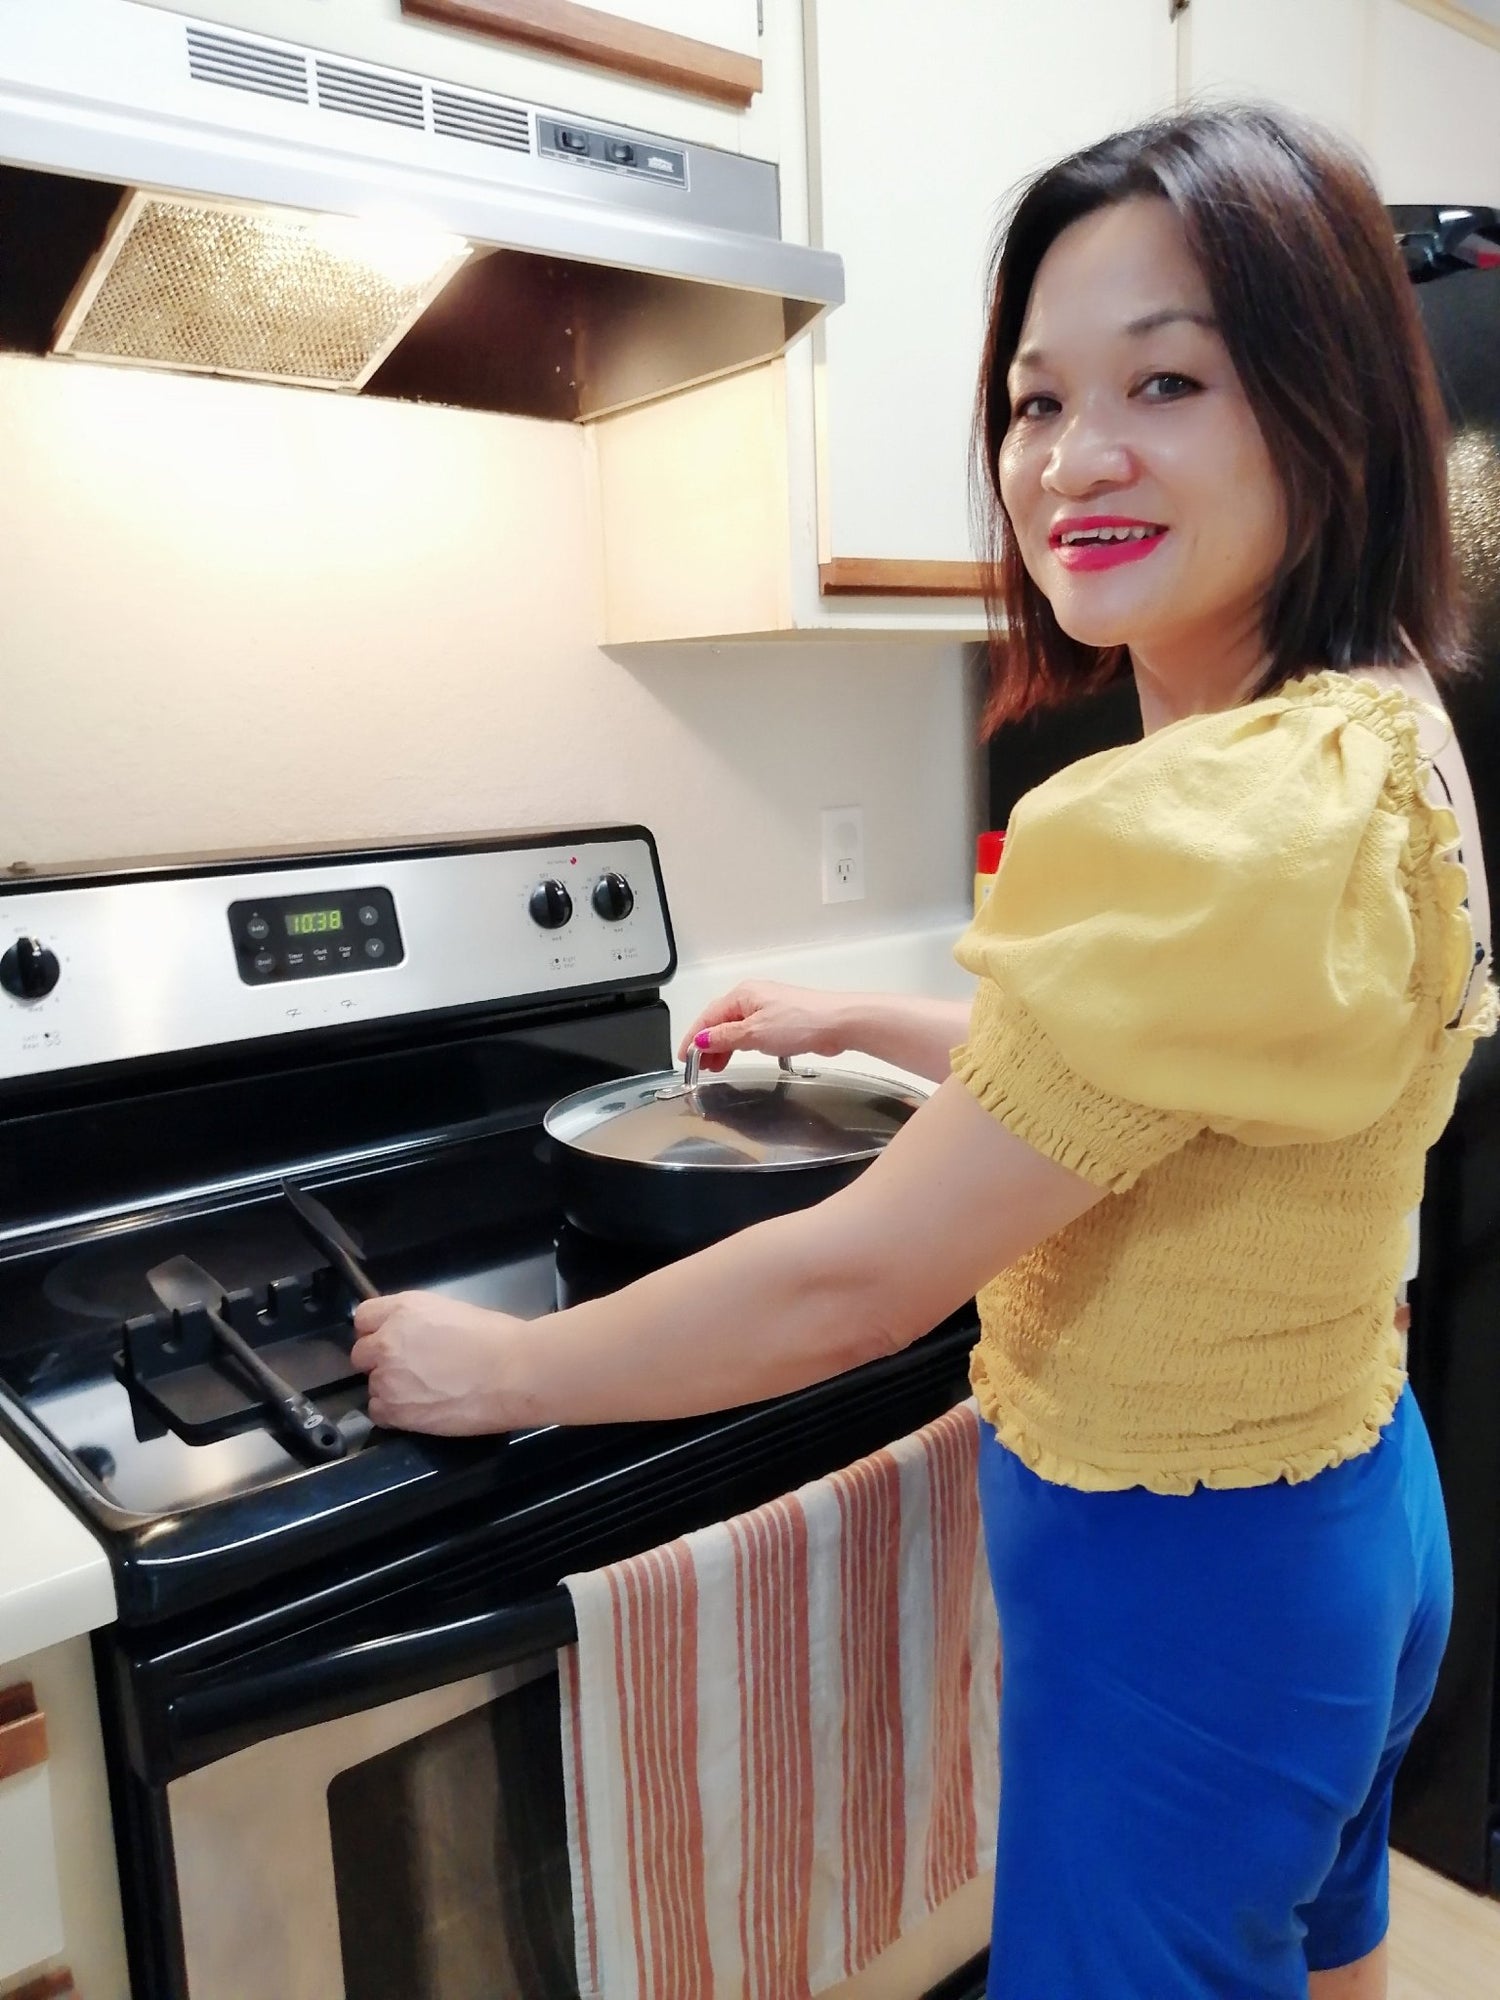 Xianghong Uses Our Utensil Rest To Keep Her Counters Neat! - Zulay Kitchen